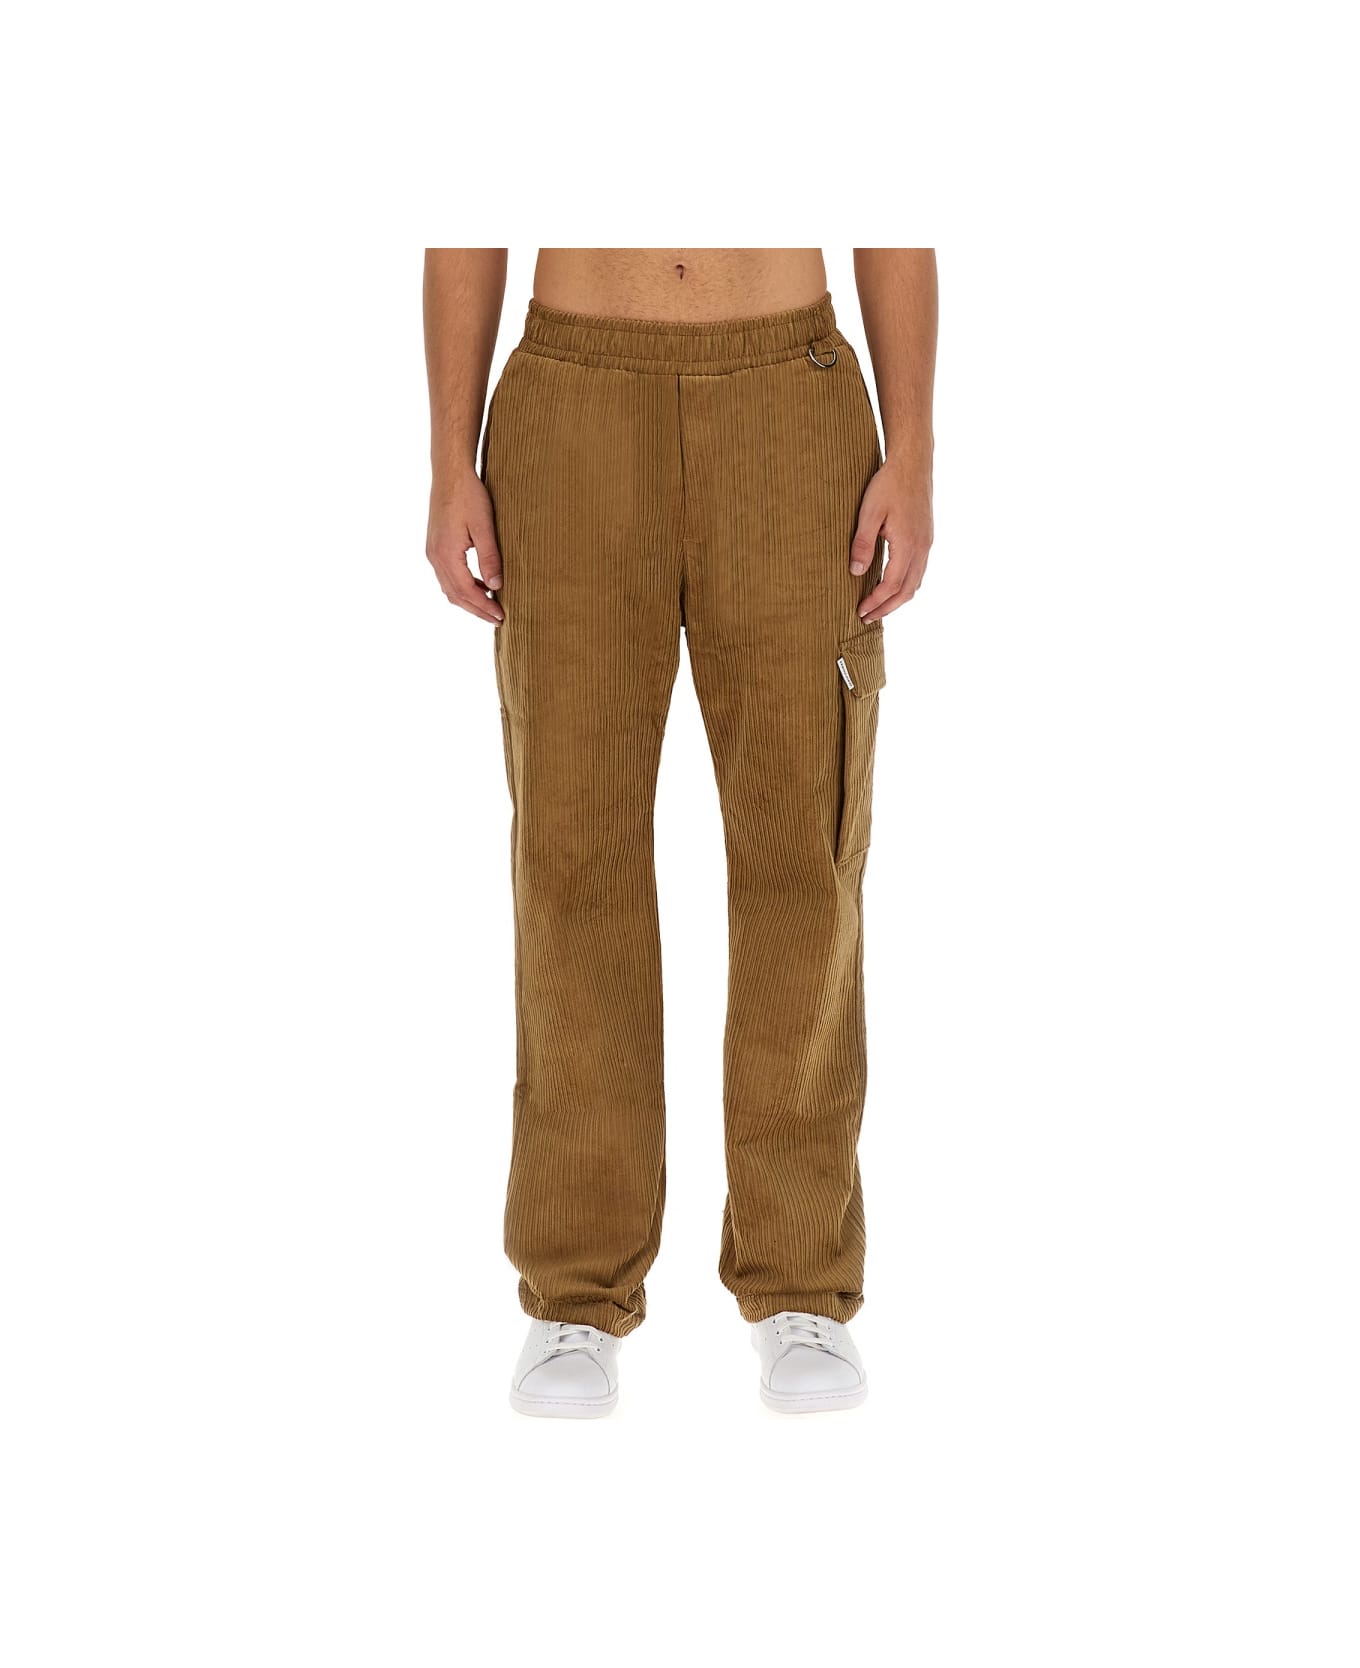 Family First Milano Cargo Pants - BEIGE ボトムス